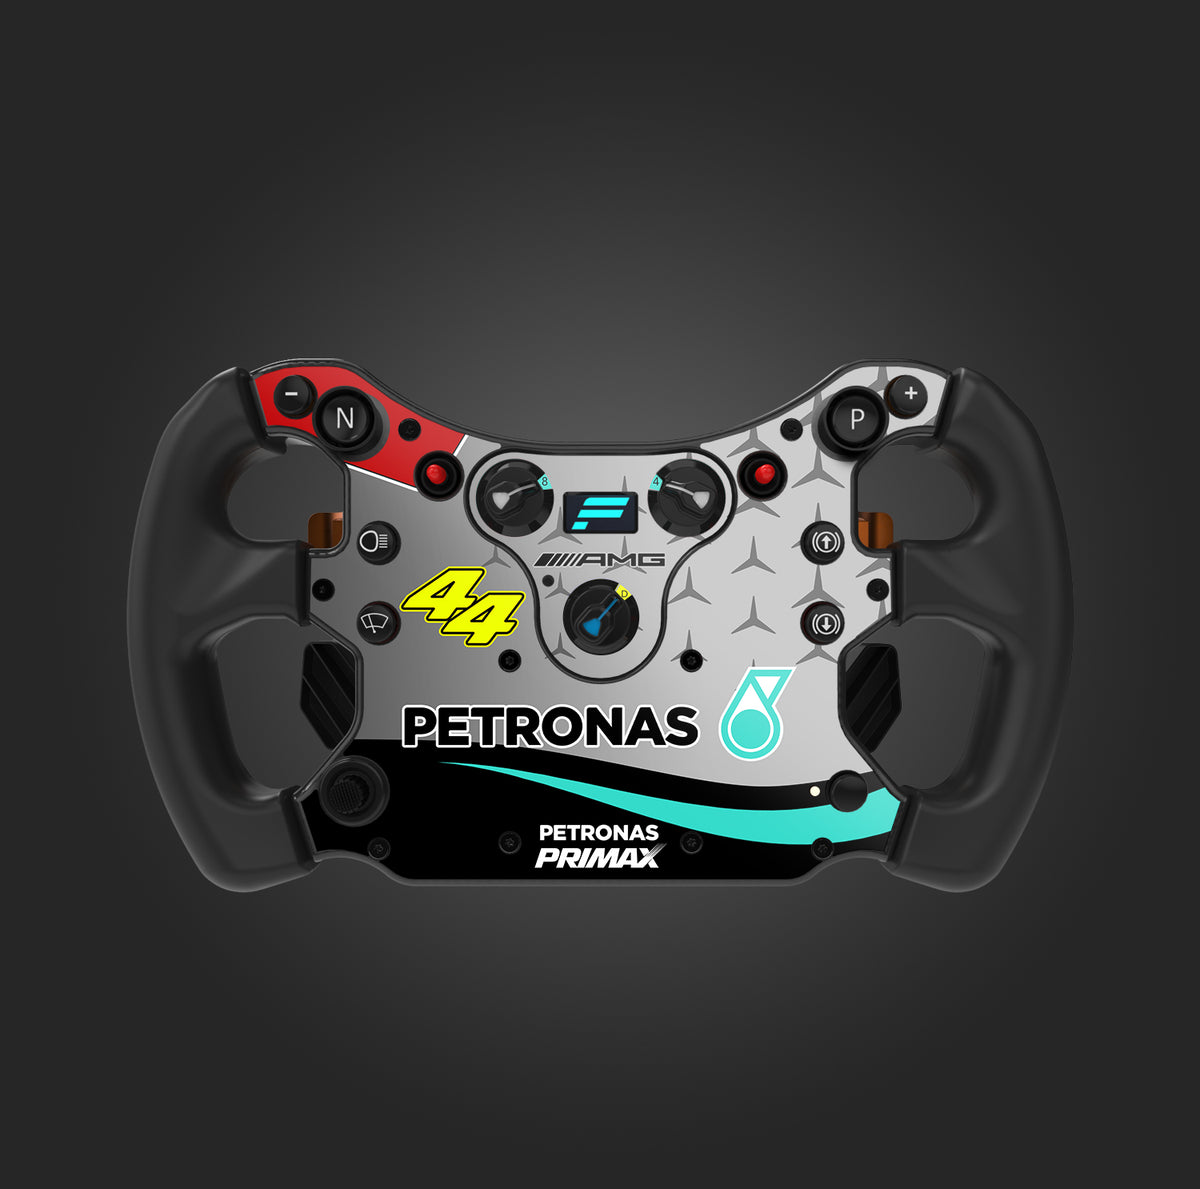 2022 AMG Petronas Mercedes F1 Livery – Lovely Stickers